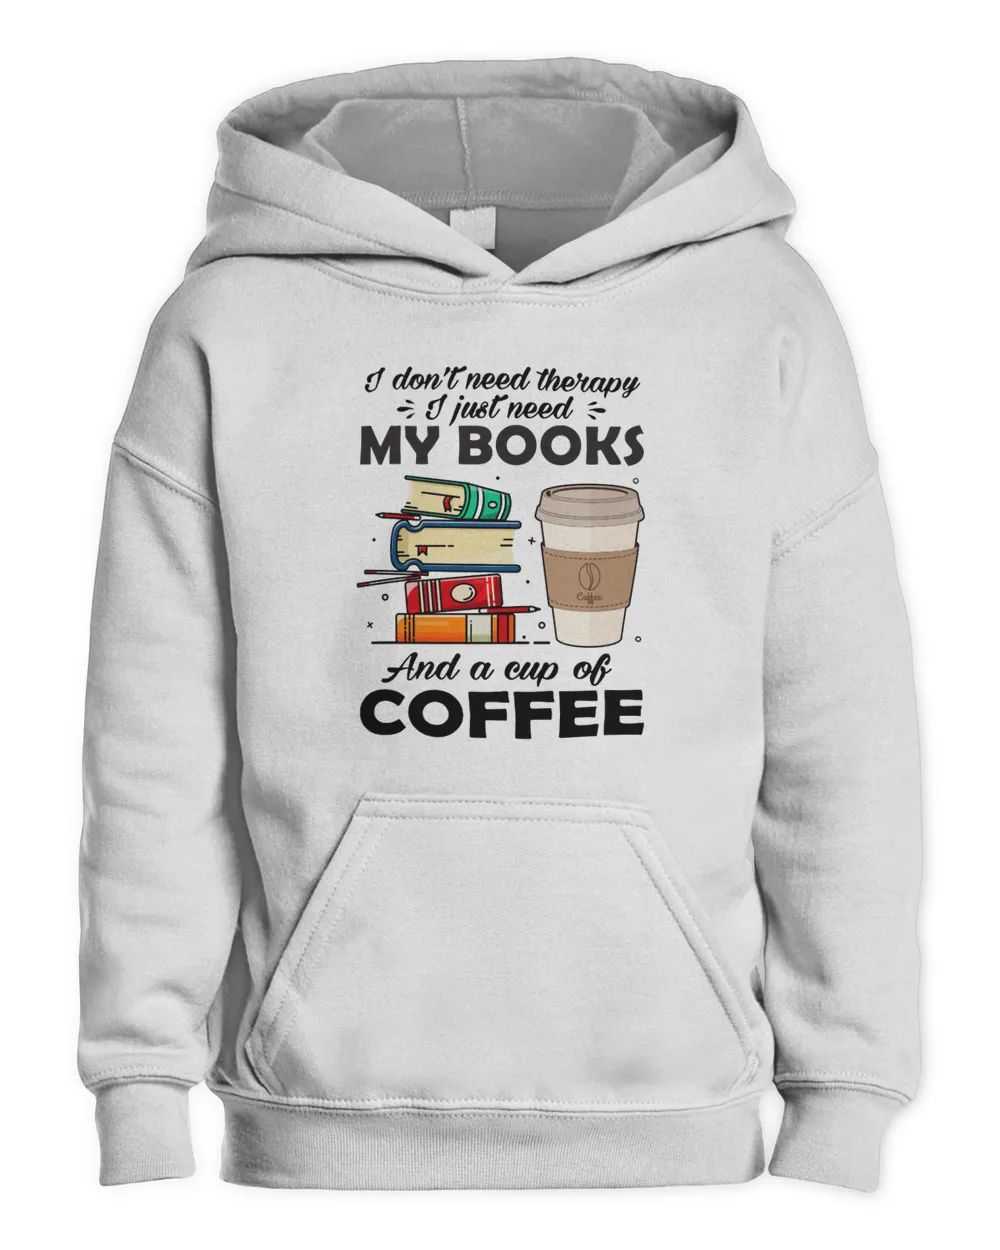 I don't need therapy i just need my books and a cup of coffee